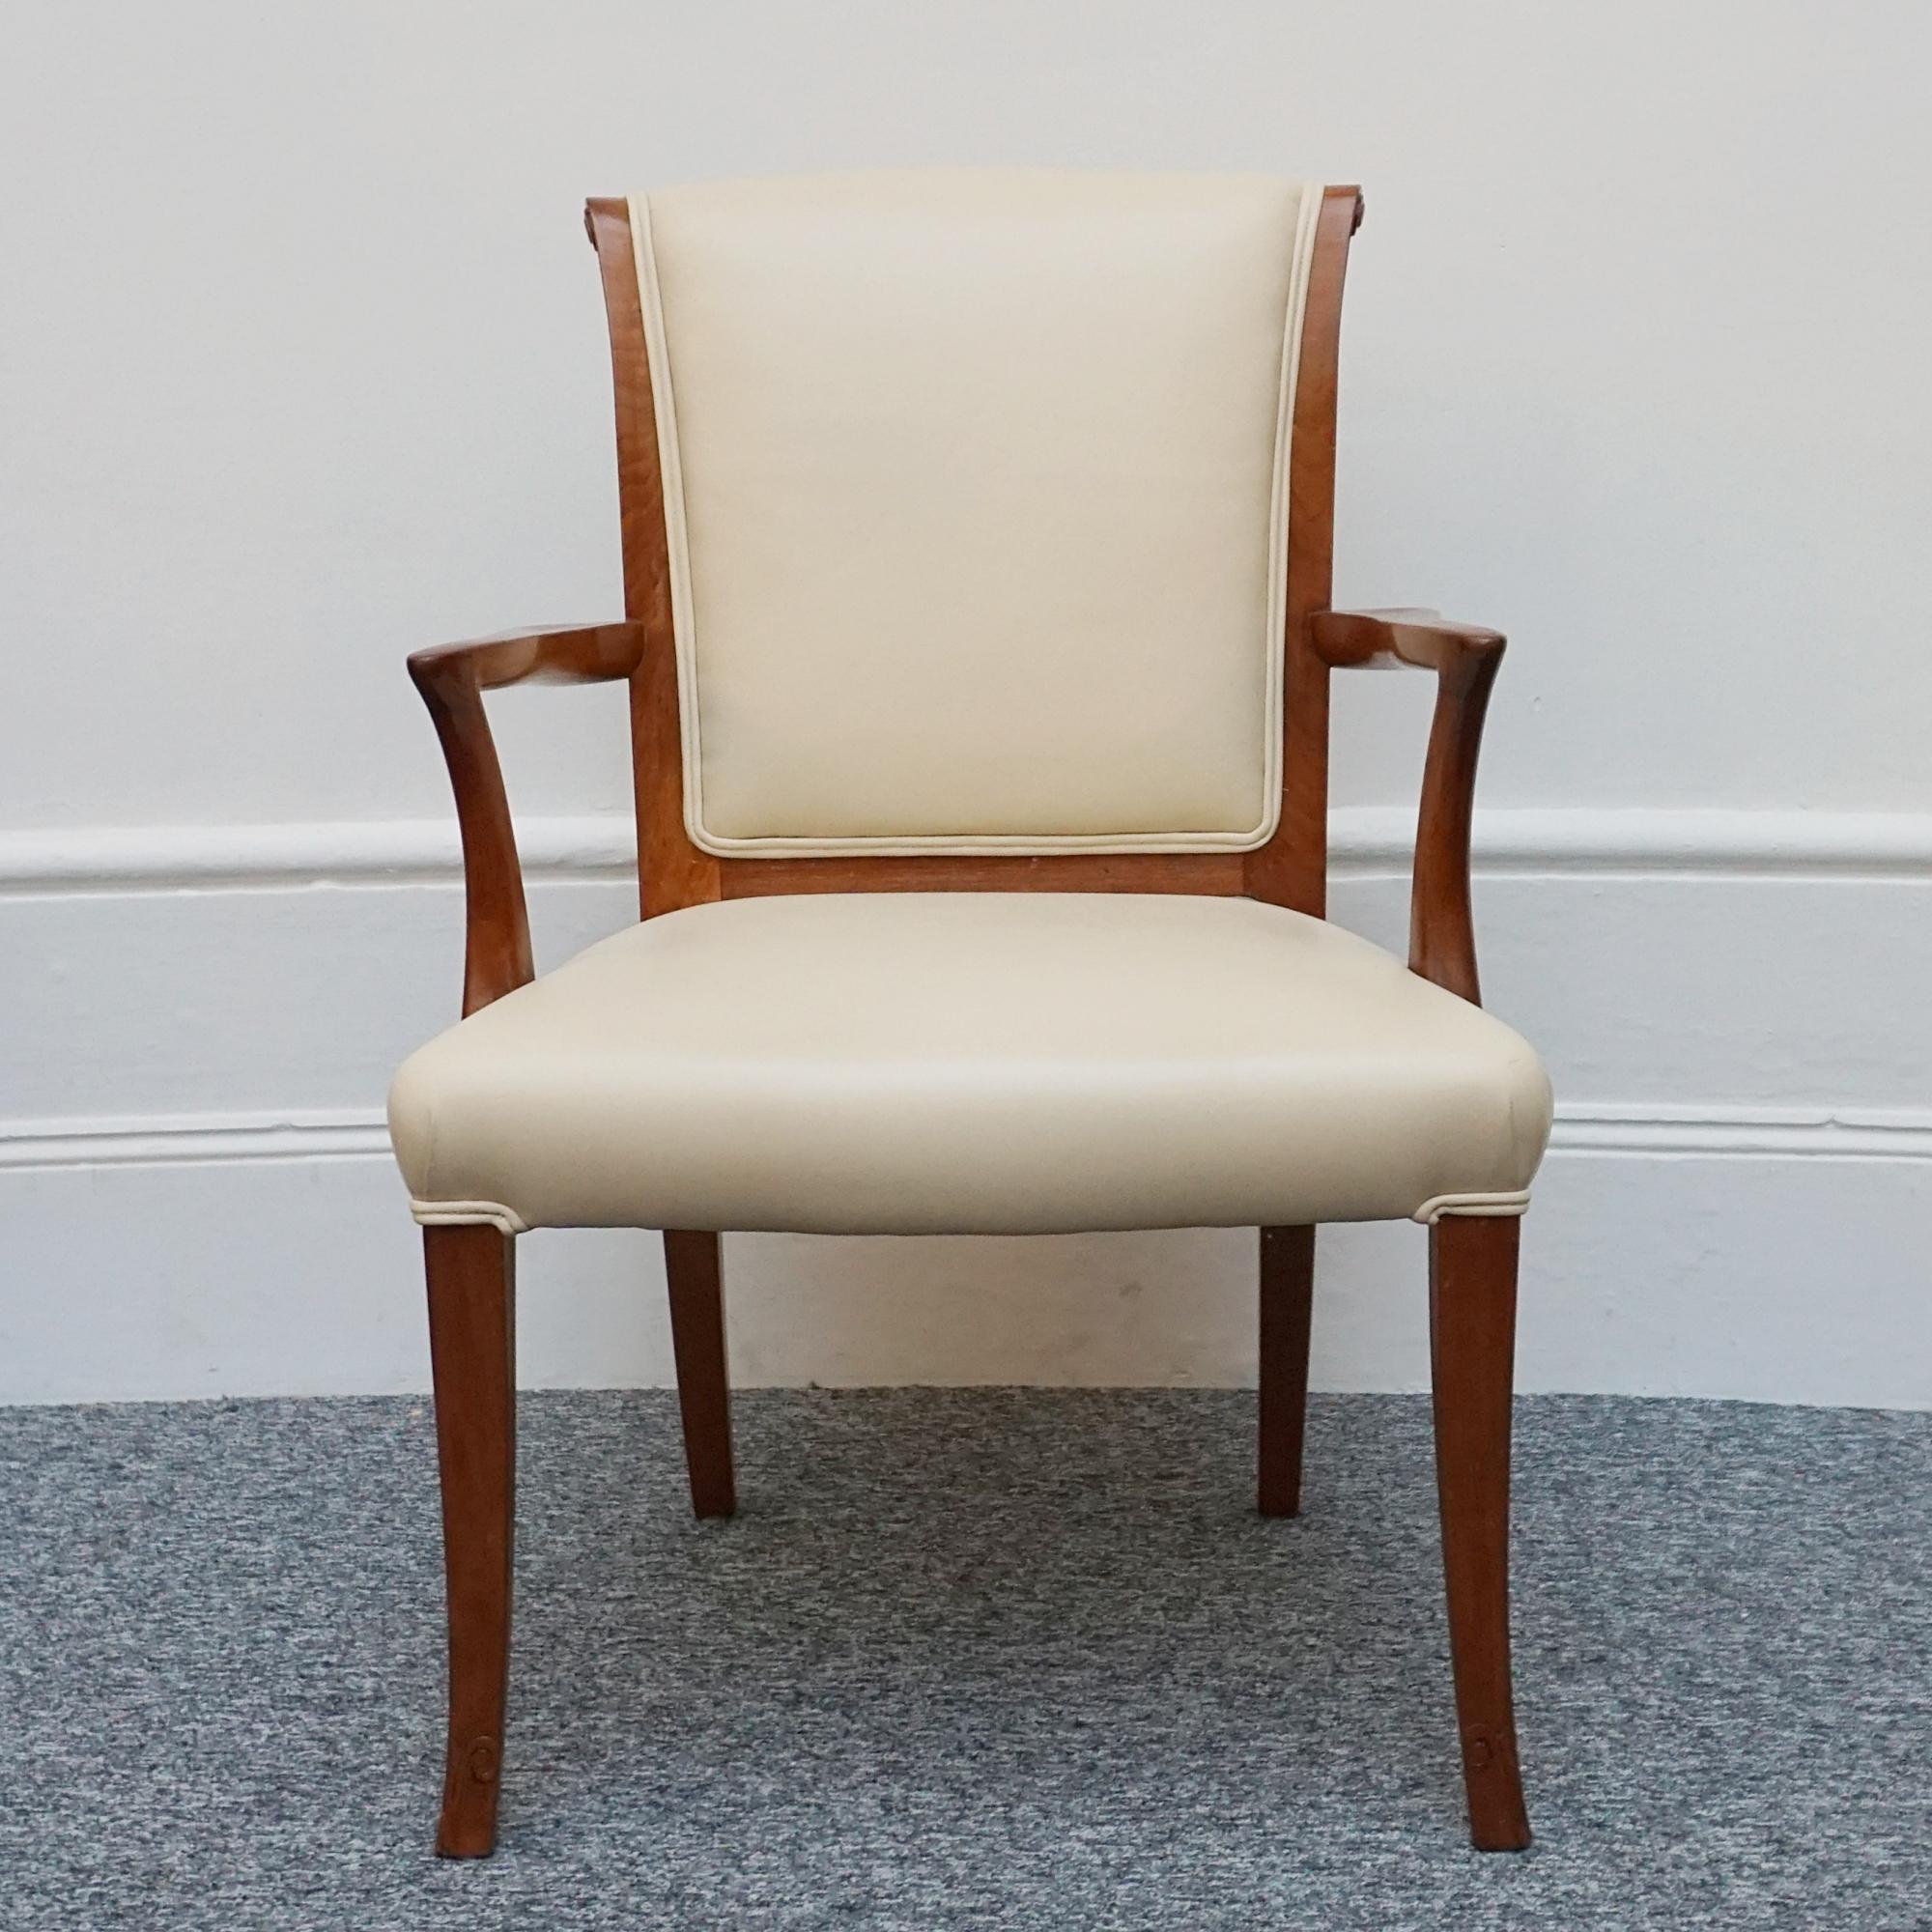 A pair of Art Deco side chairs. Solid walnut with carved scroll detail to feet and back. Upholstered in cream leather.

Dimensions: H 90cm W 60cm D 50cm, Seat H 45cm

Origin: English

Date: Circa 1935

Item Number: 0202244